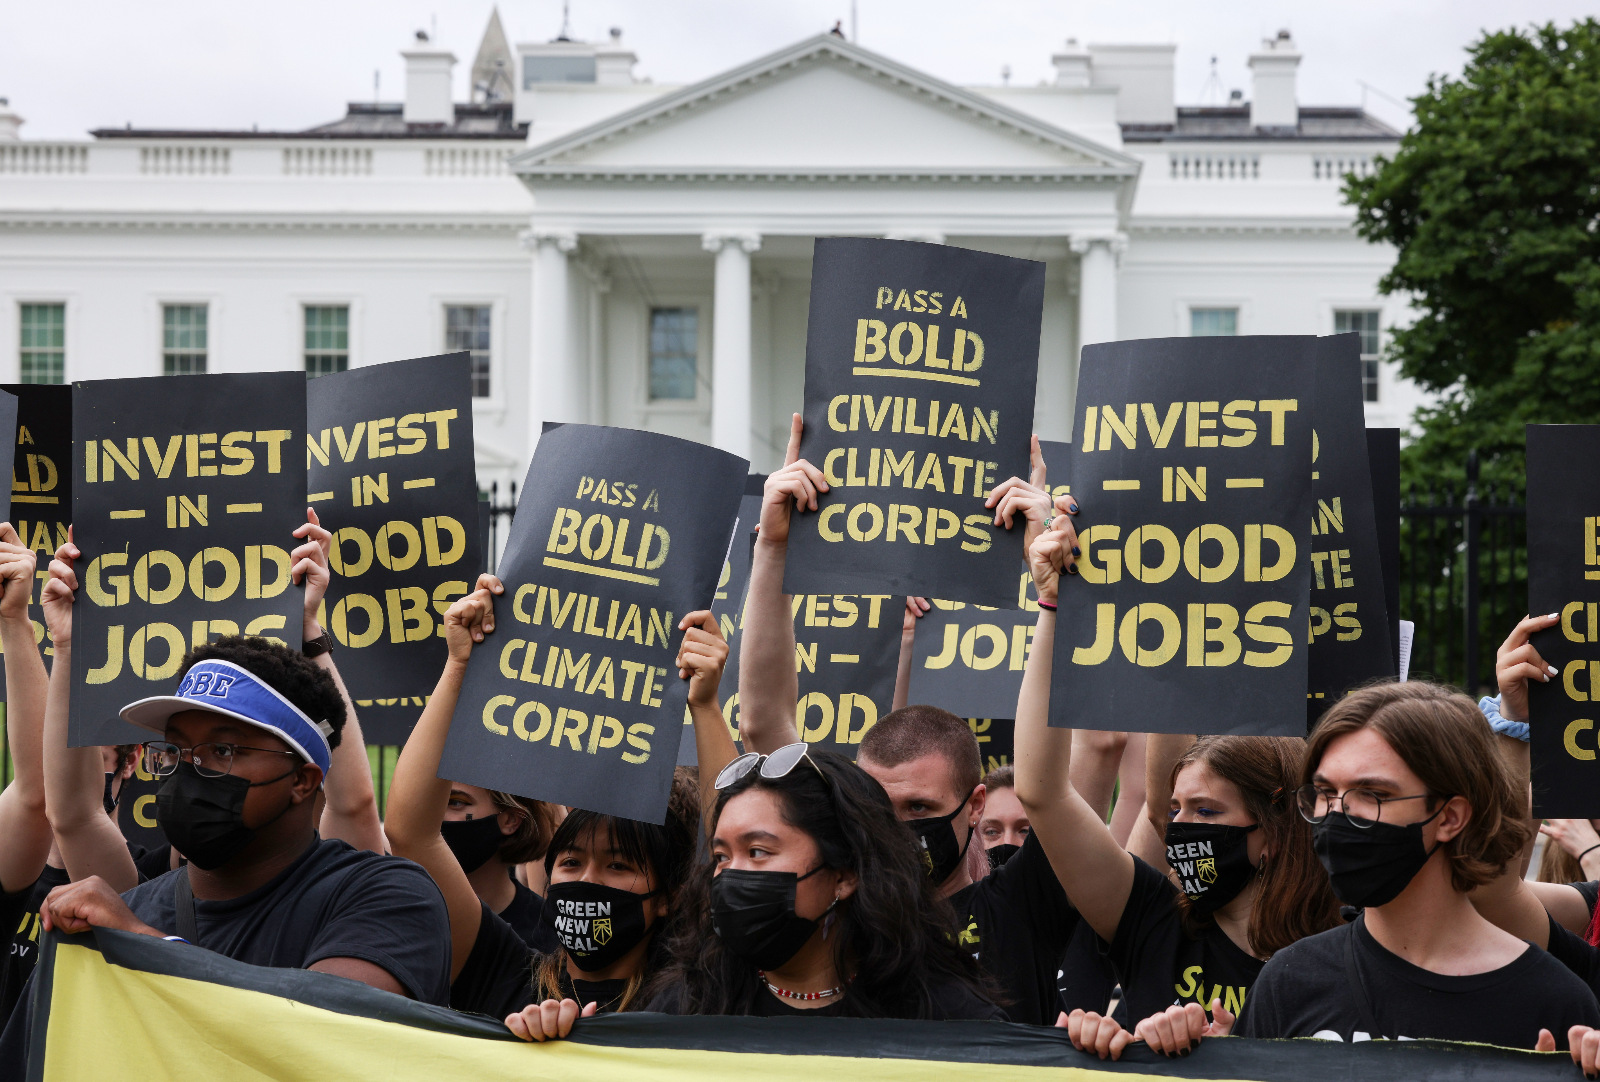 Photo of protesters in front of the White House holding signs reading 'invest in good jobs' and 'pass a bold Civilian Climate Corps'